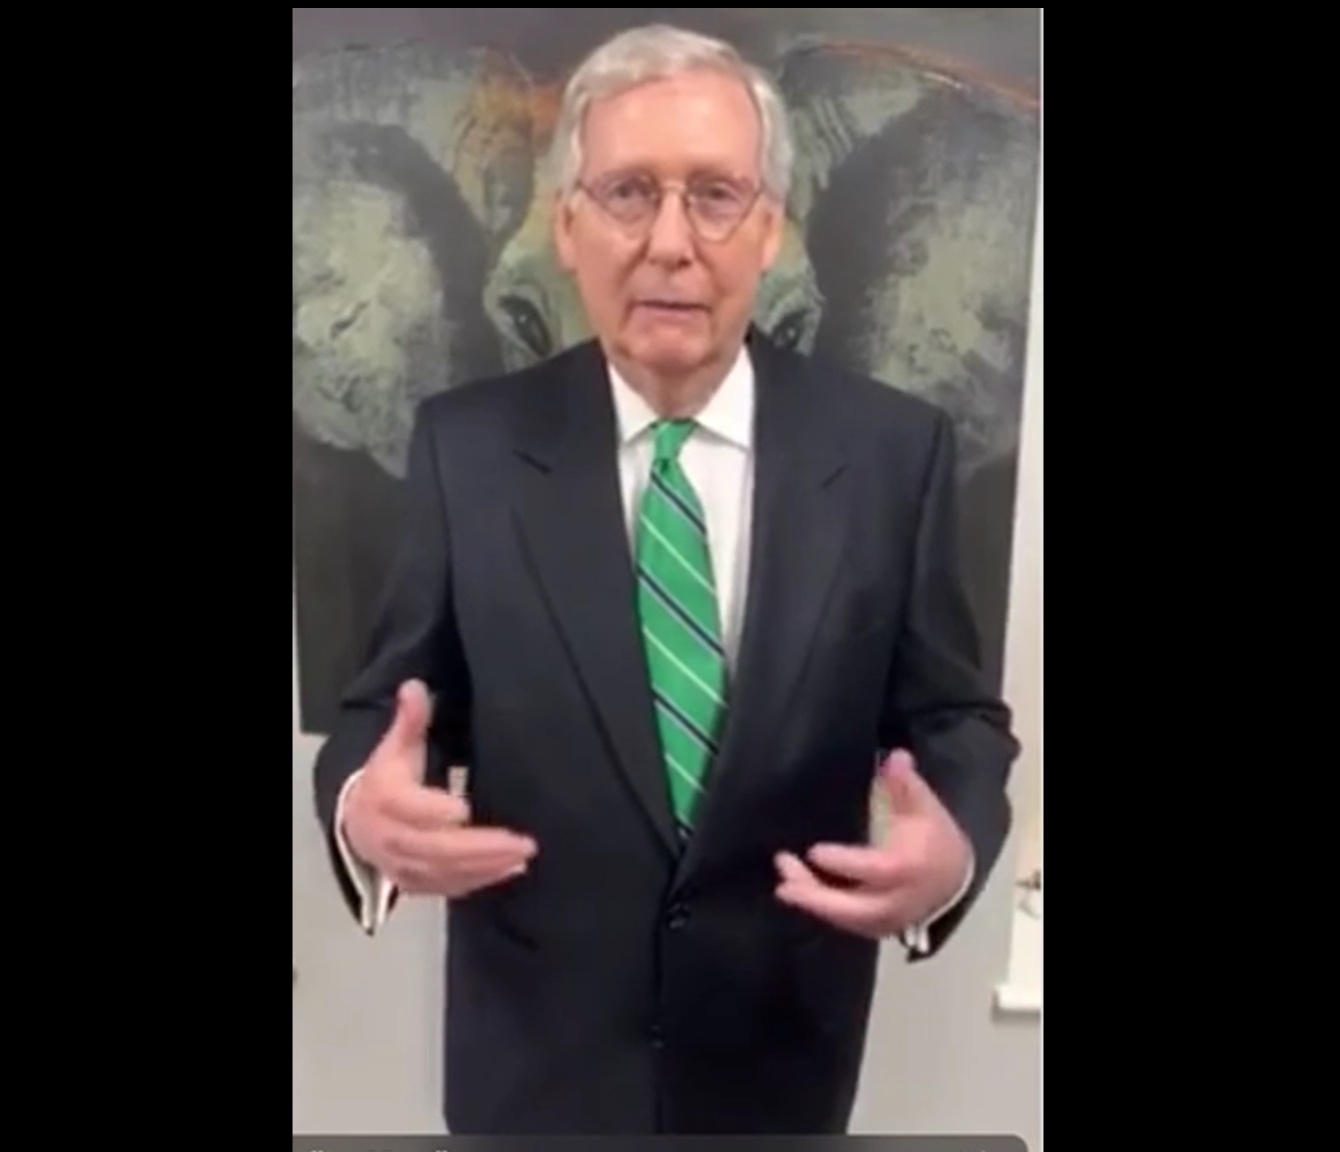 Senate Majority Leader Mitch McConnell appeals to voters to help keep a Republican majority in the Senate to stop impeachment against President Donald Trump, Oct. 3, 2019. Facebook screenshot